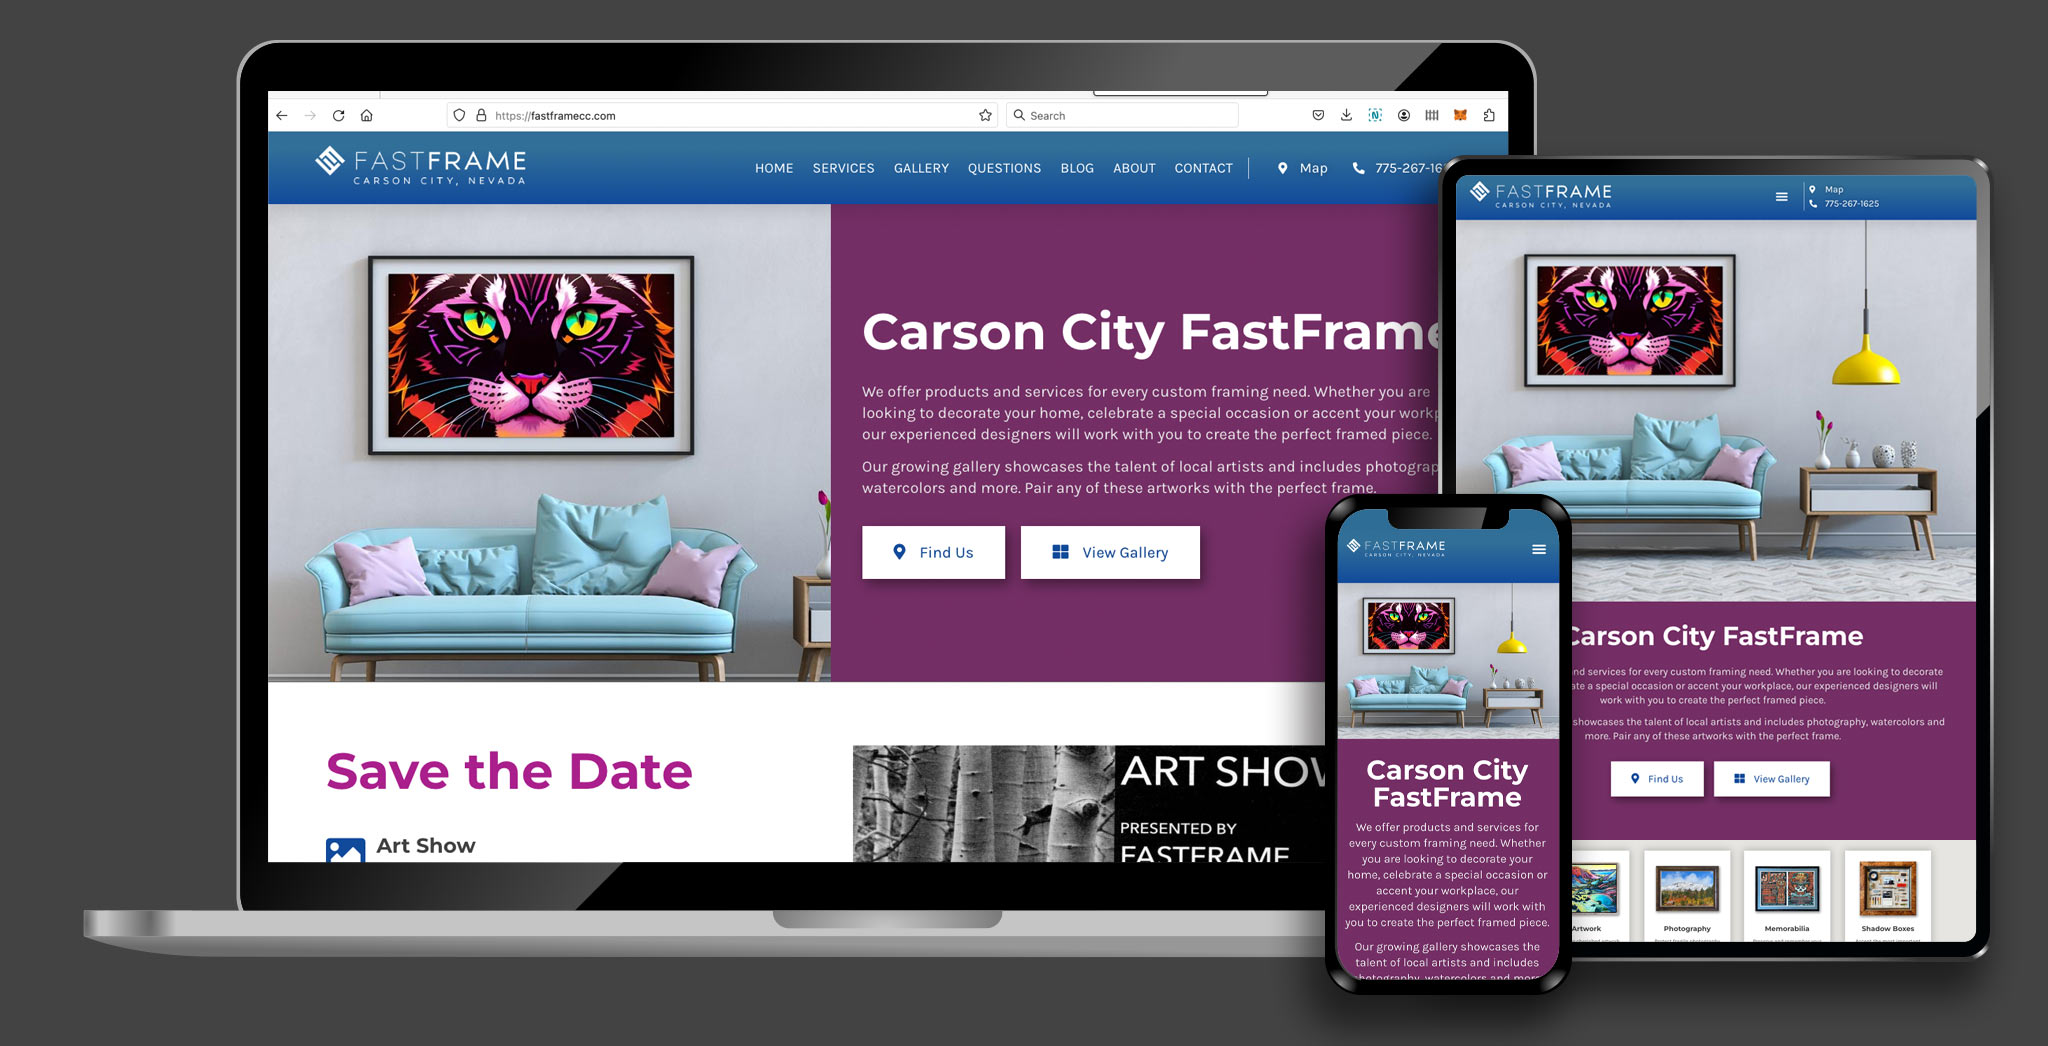 FastFrame Carson City homepage